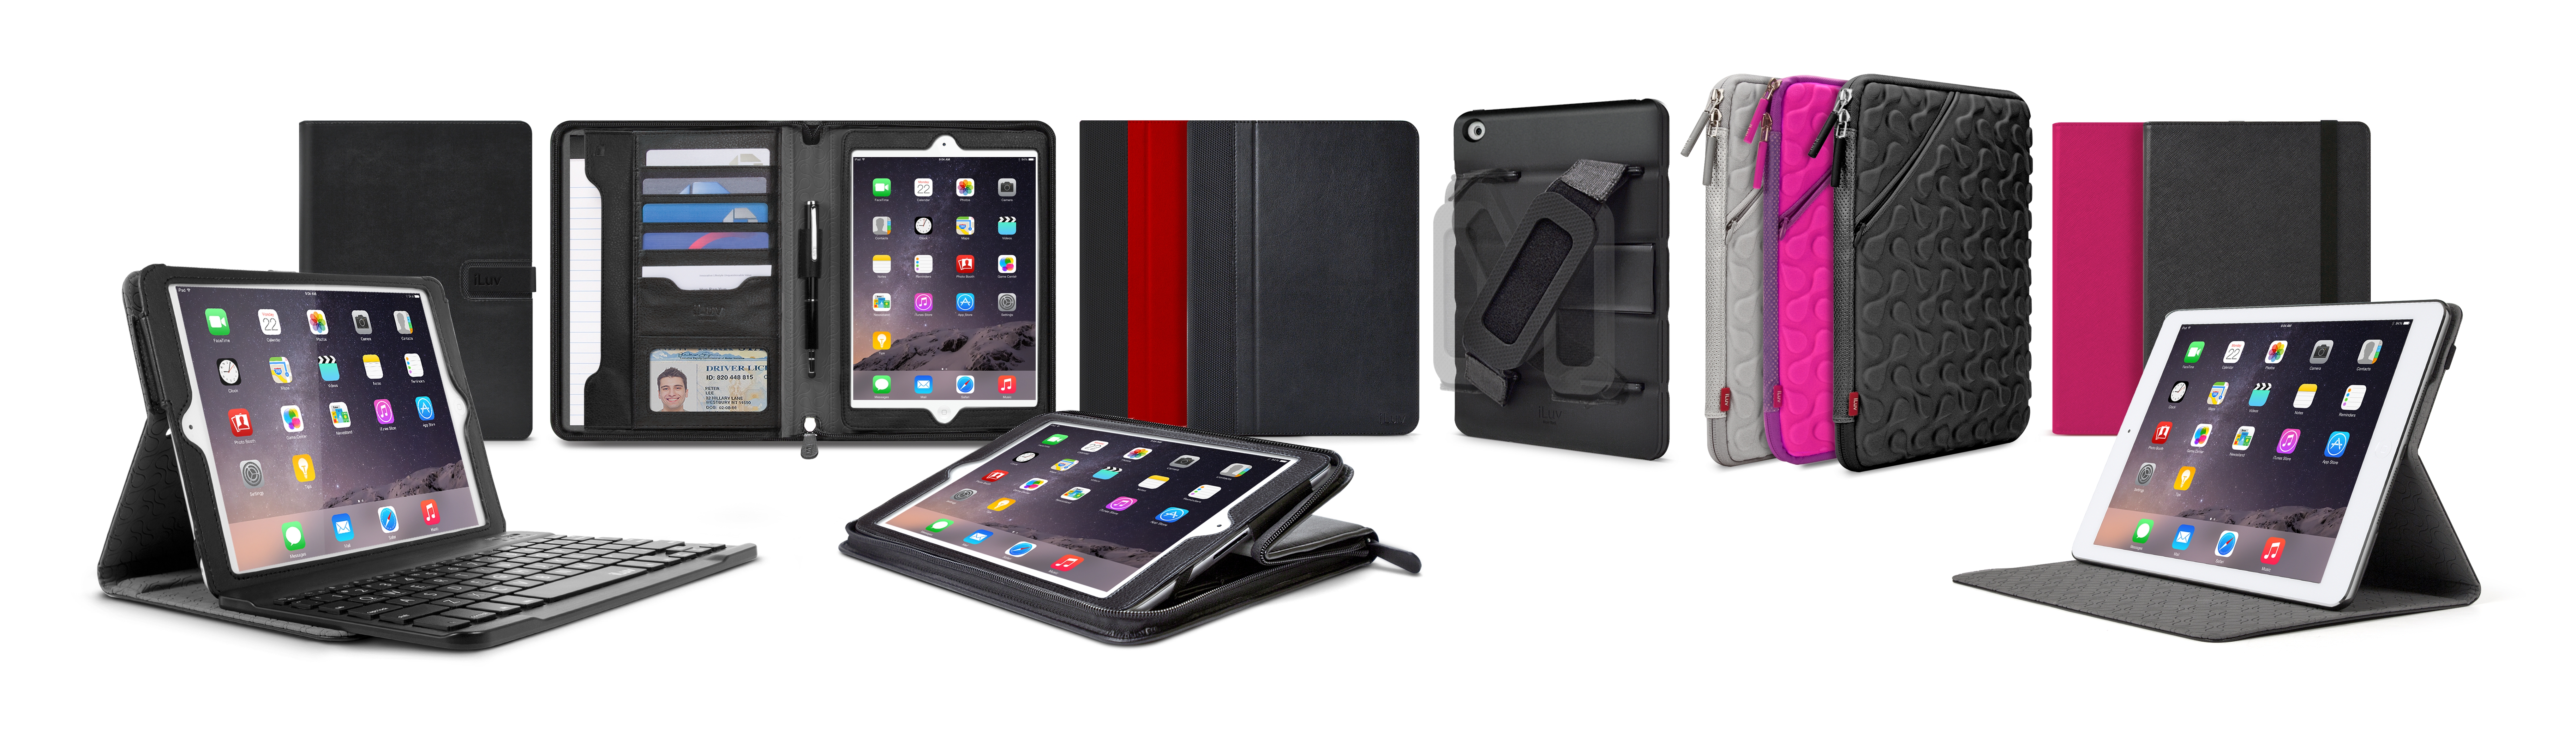 iPad Air 2 and iPad mini 3 cases from iLuv